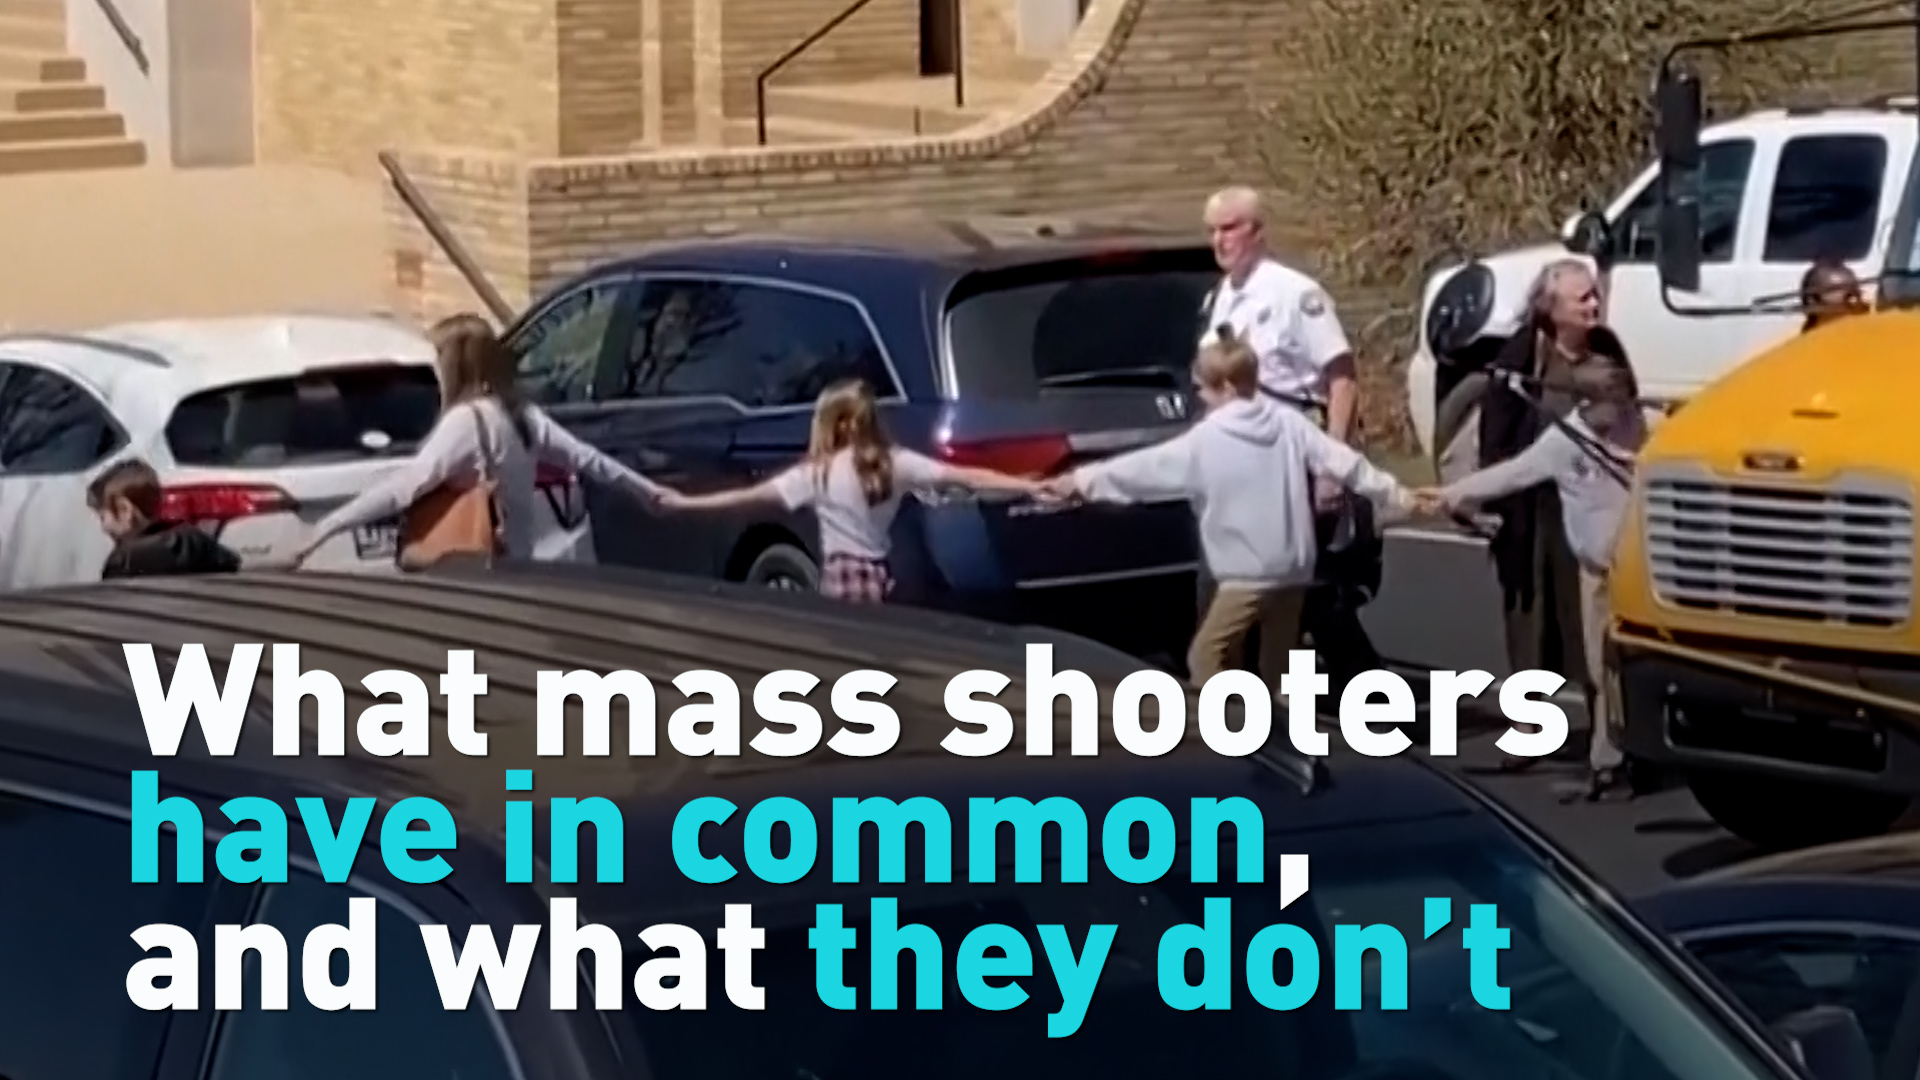 What mass shooters have in common, and what they don’t